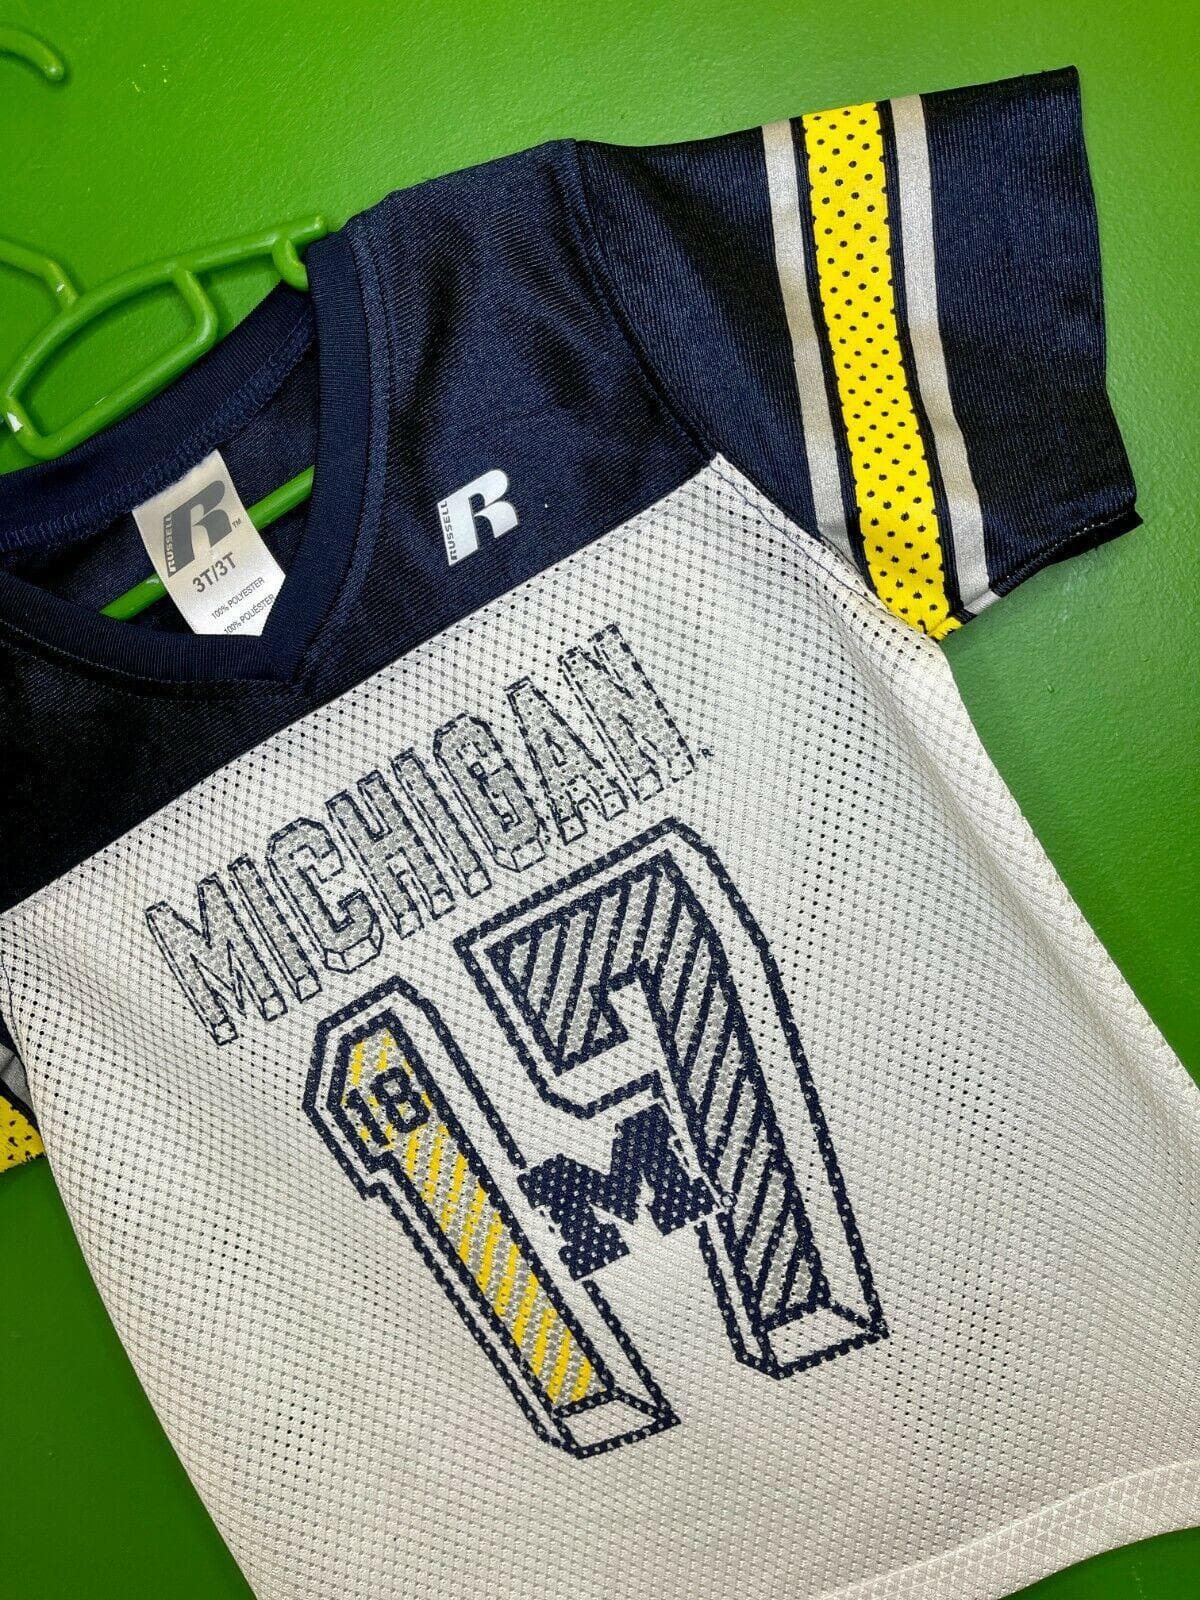 NCAA Michigan Wolverines Russell Jersey Toddler 3T